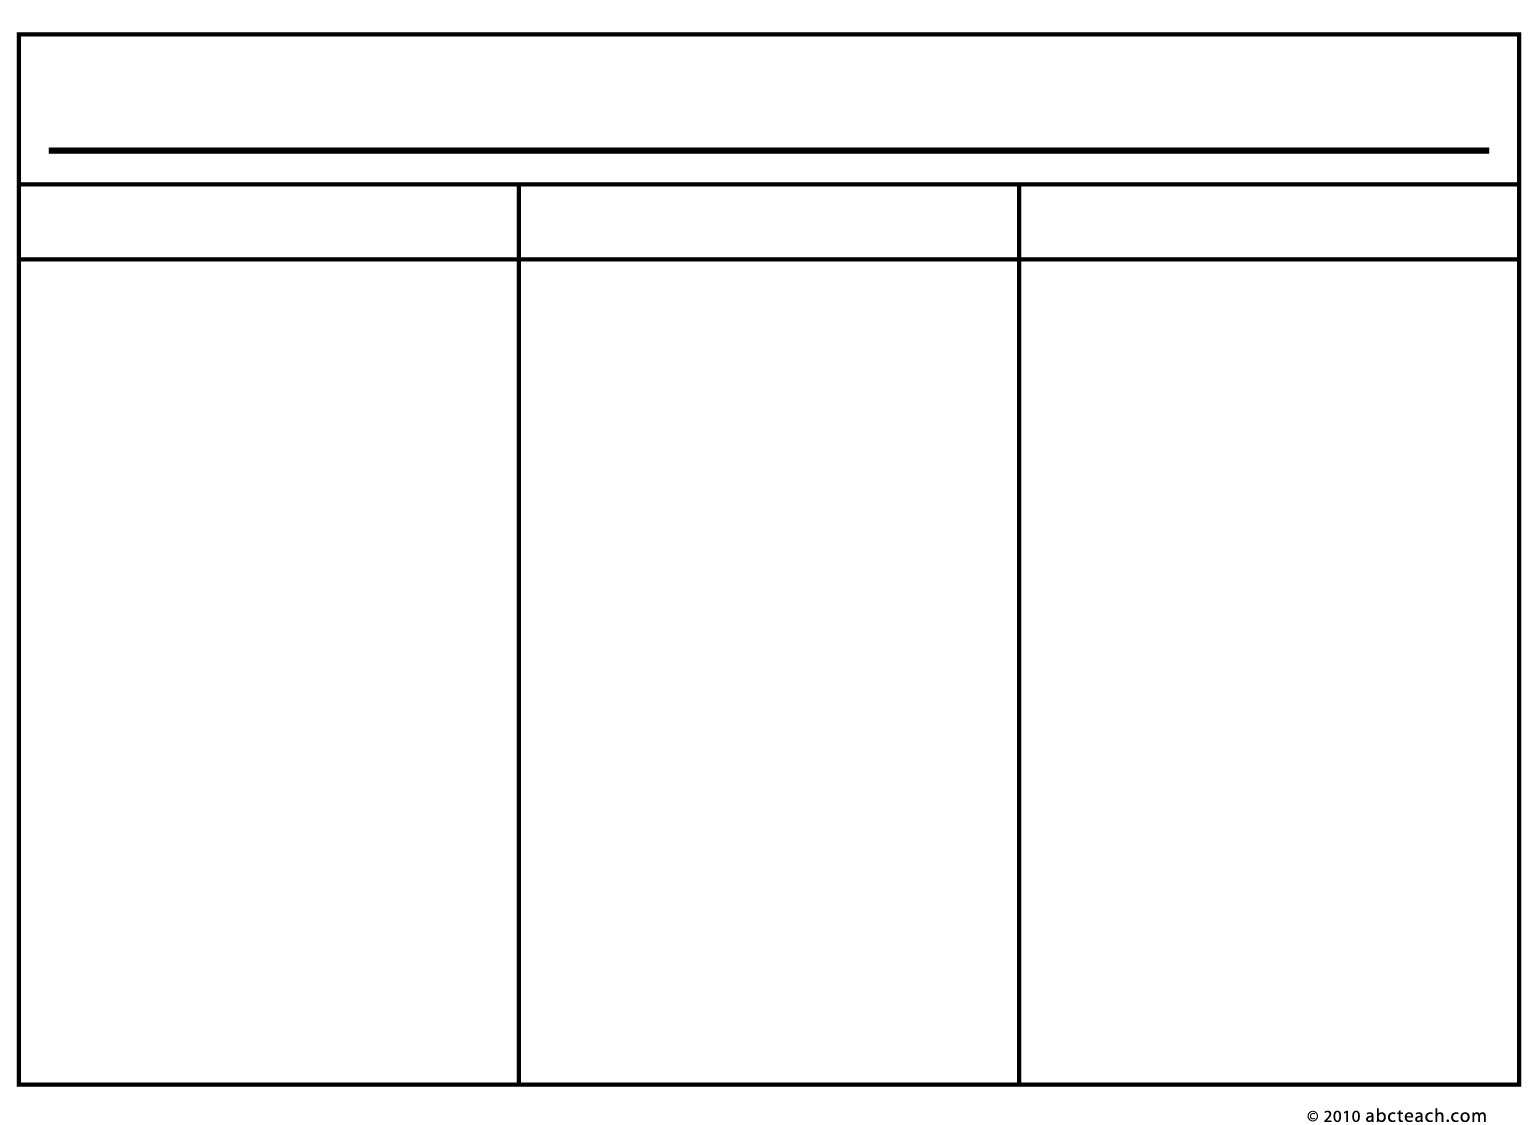 Blank 2 Column Notes Form Freeology